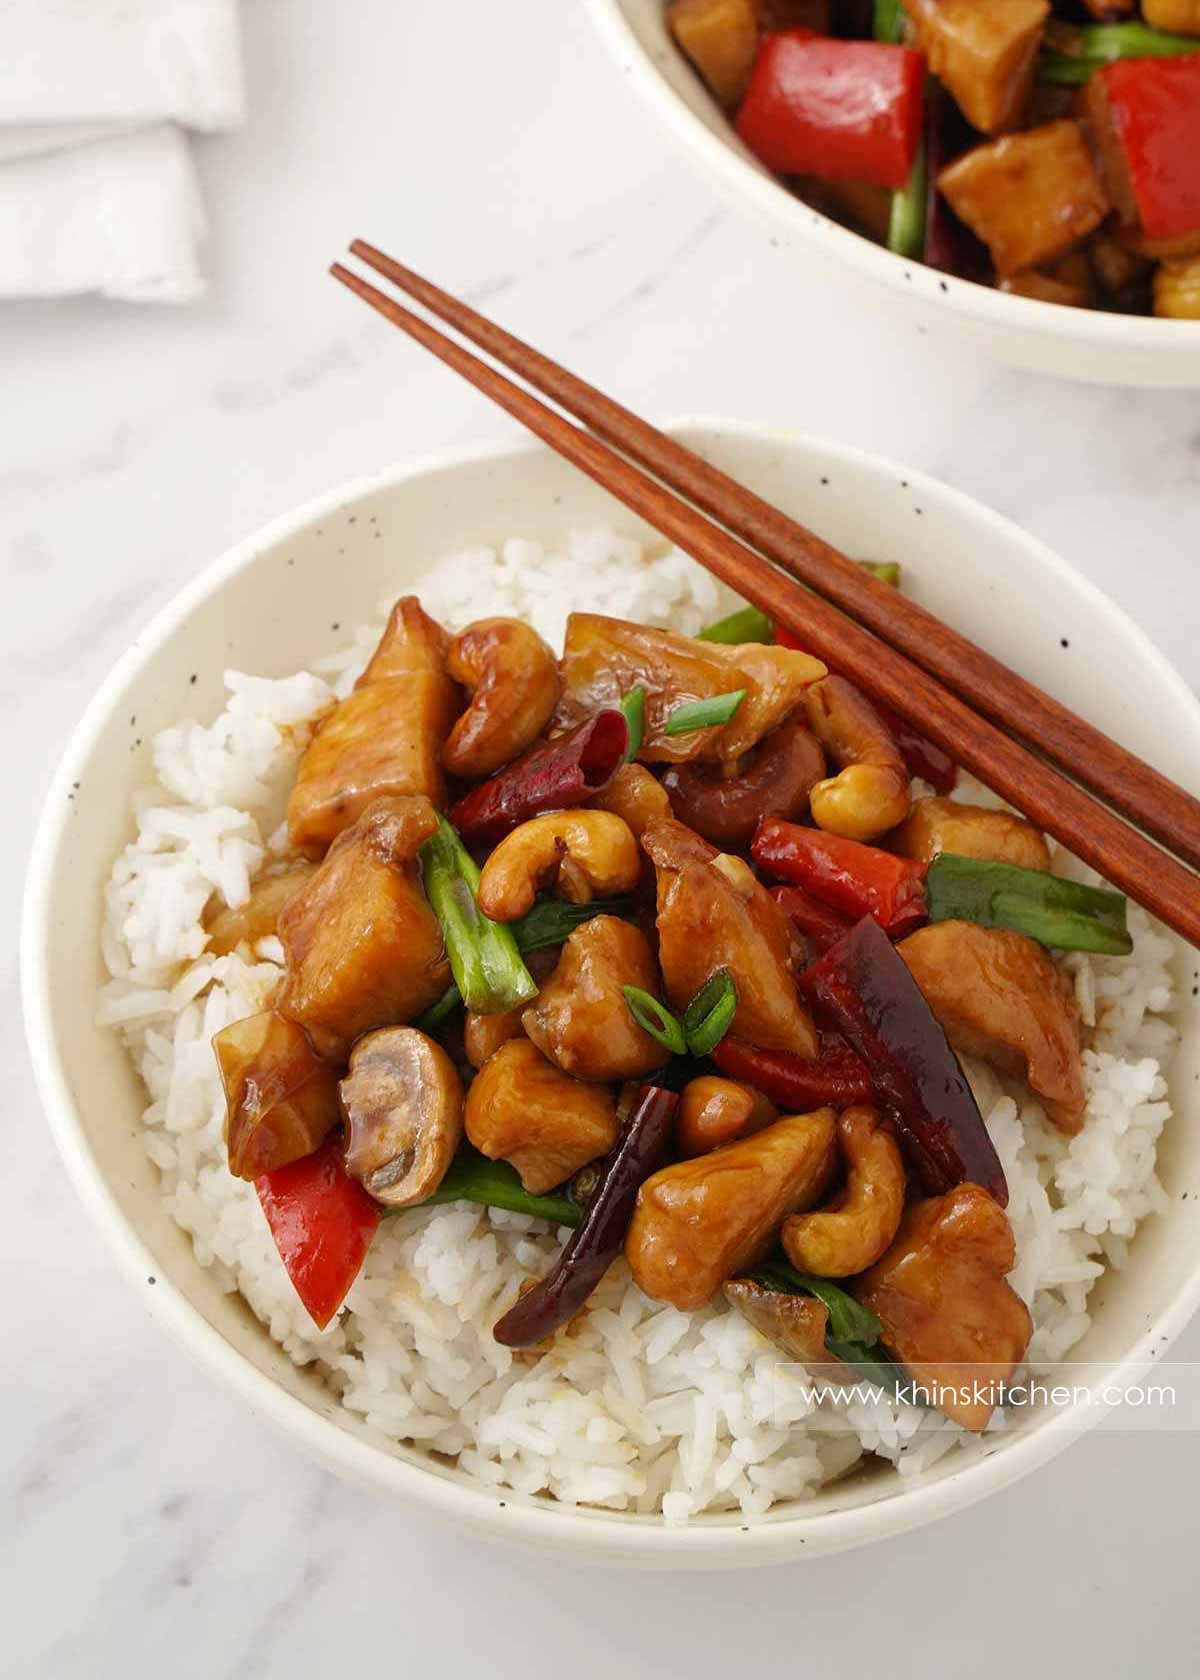 A white bowl containing chicken stir fries, cashew nuts, mushrooms, chillies and white rice.